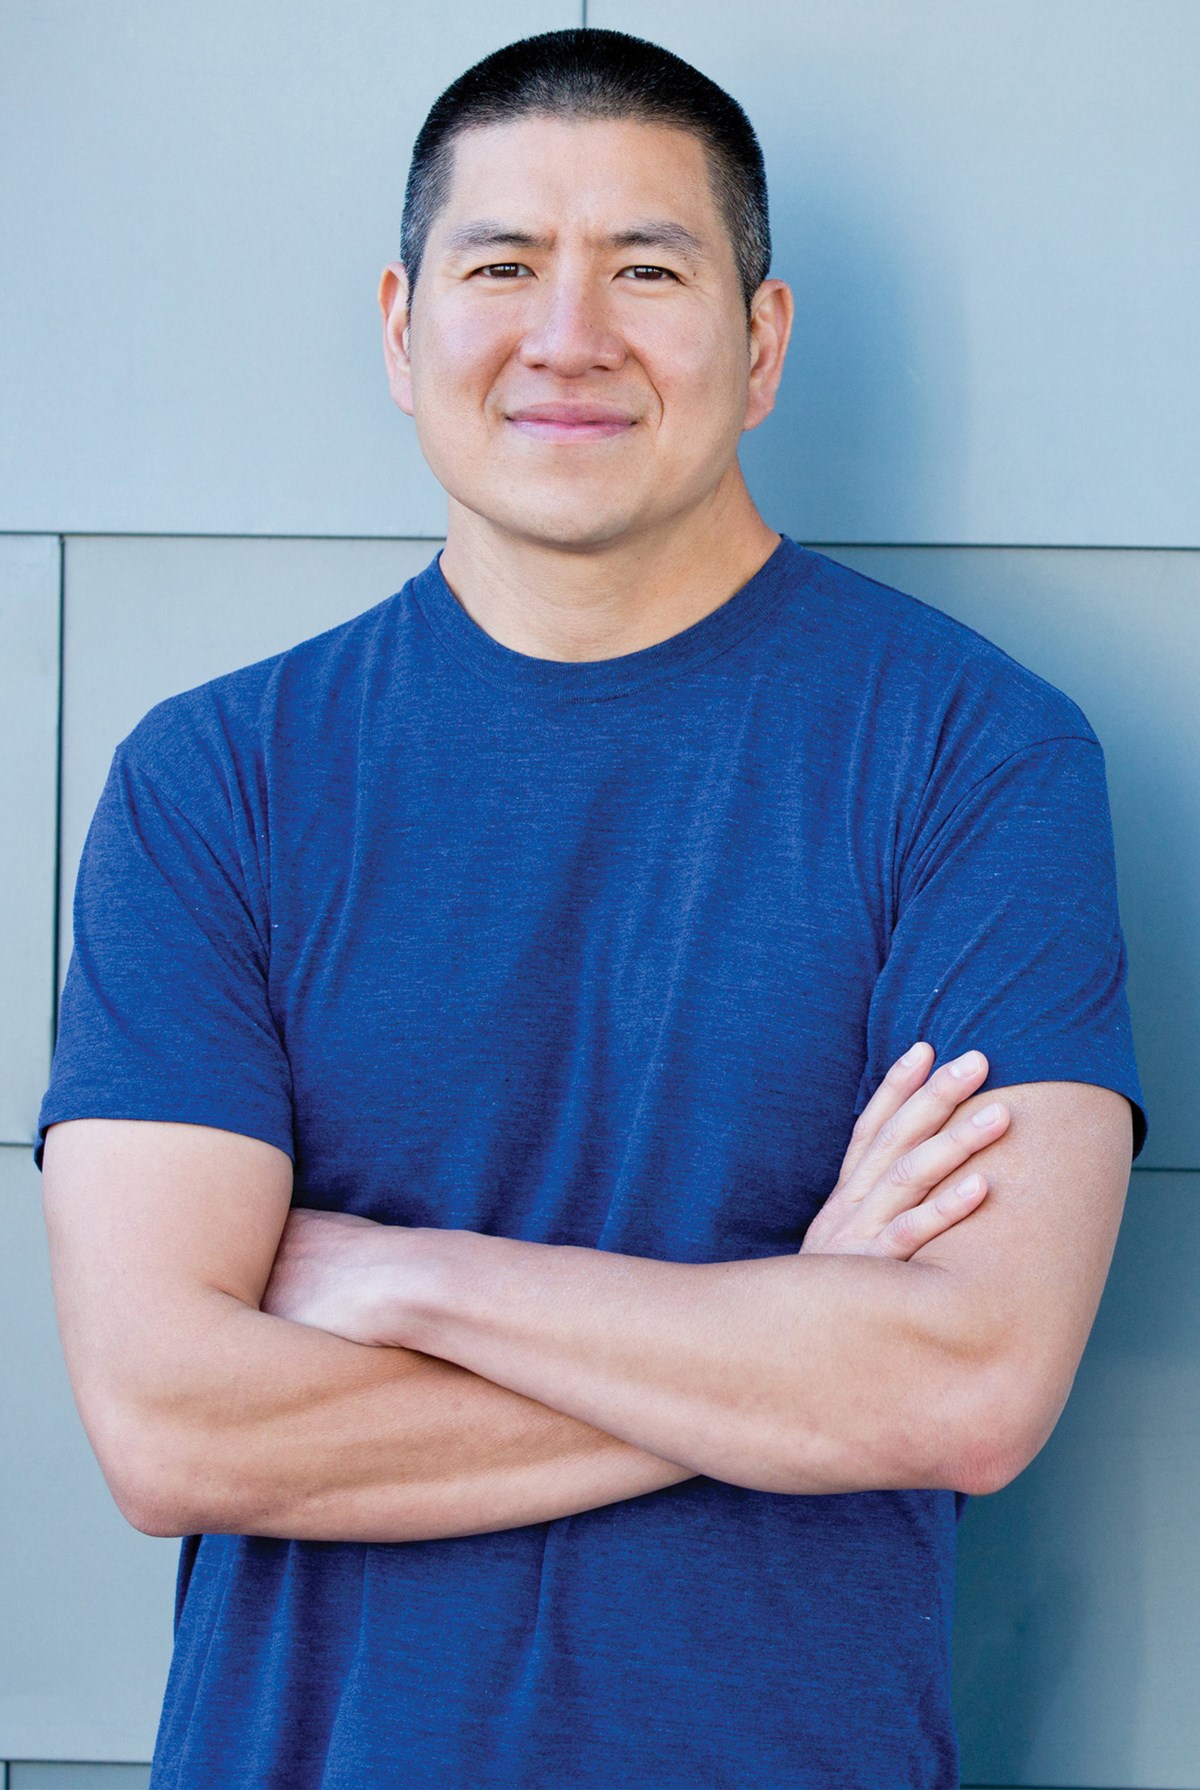 Eric Tang, Ph.D., is Assistant Professor in the African and African Diaspora Studies Department and faculty member in the Center for Asian American Studies at the University Texas at Austin. 